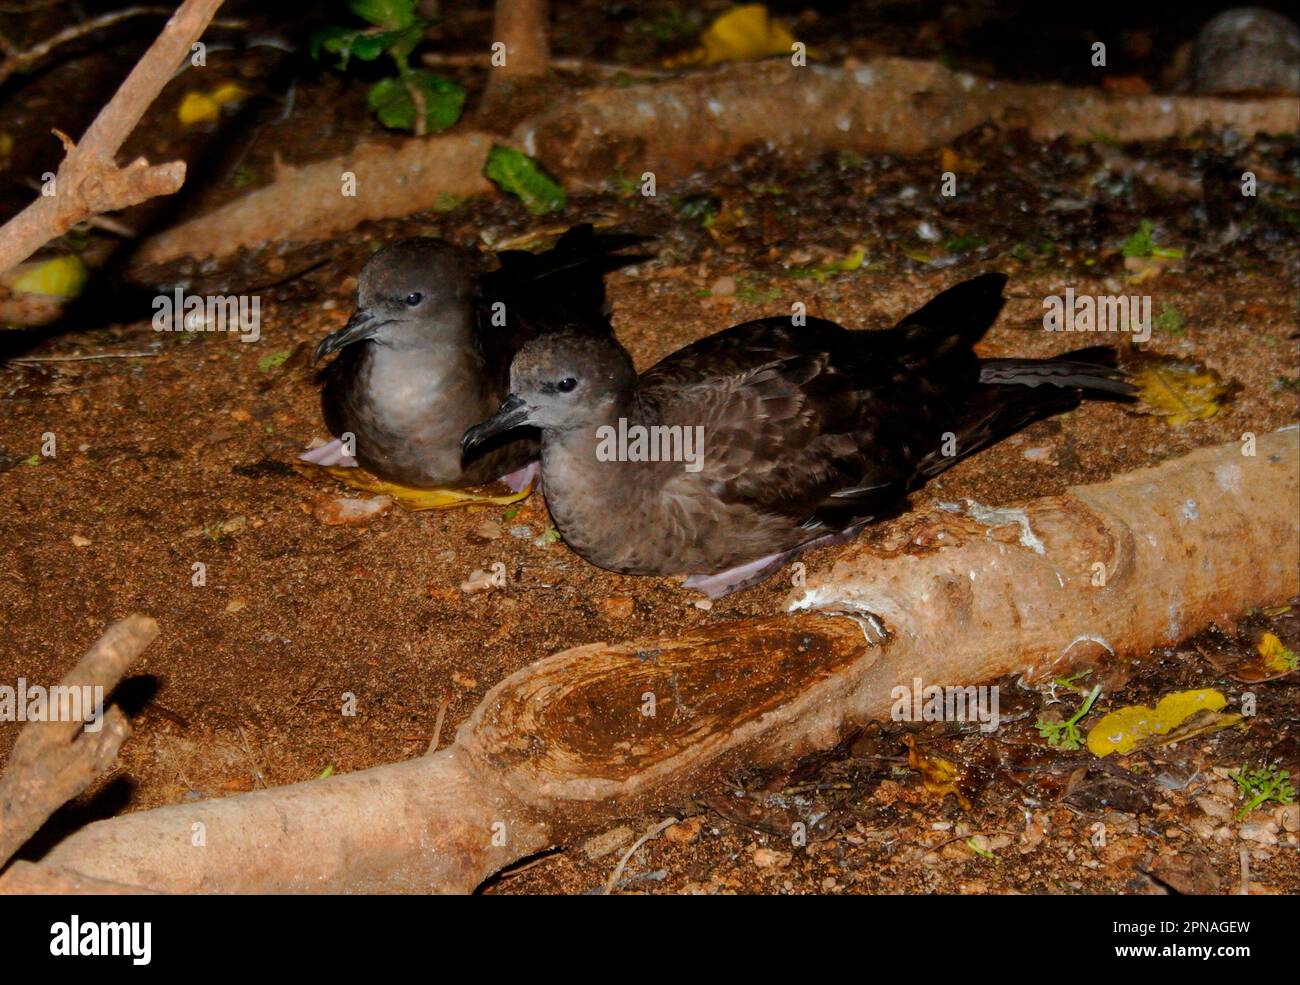 Wedge-tailed Shearwater (Puffinus pacificus) adult pair, sitting near nest burrow, Lady Elliot Island, Queensland, Australia Stock Photo